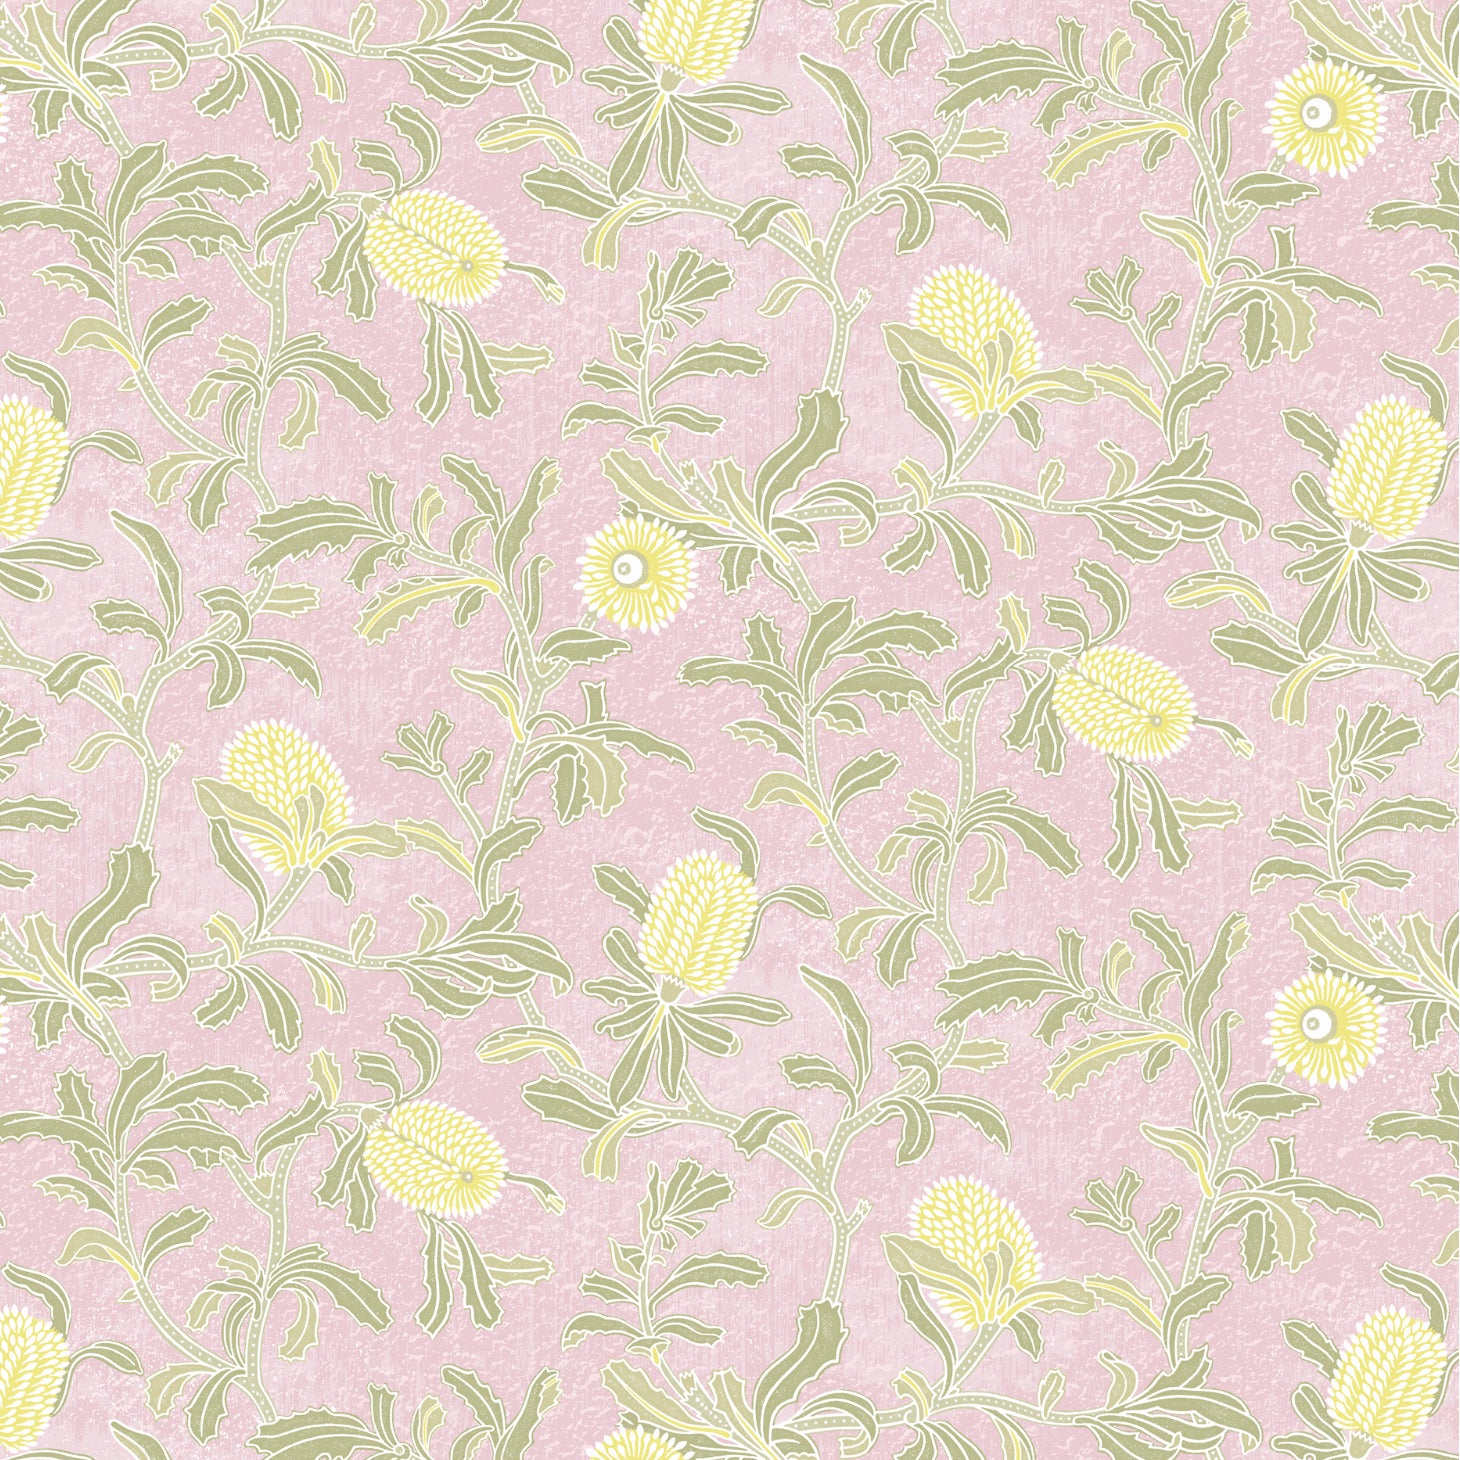 Detail of wallpaper in a floral print in shades of yellow and green on a light pink field.